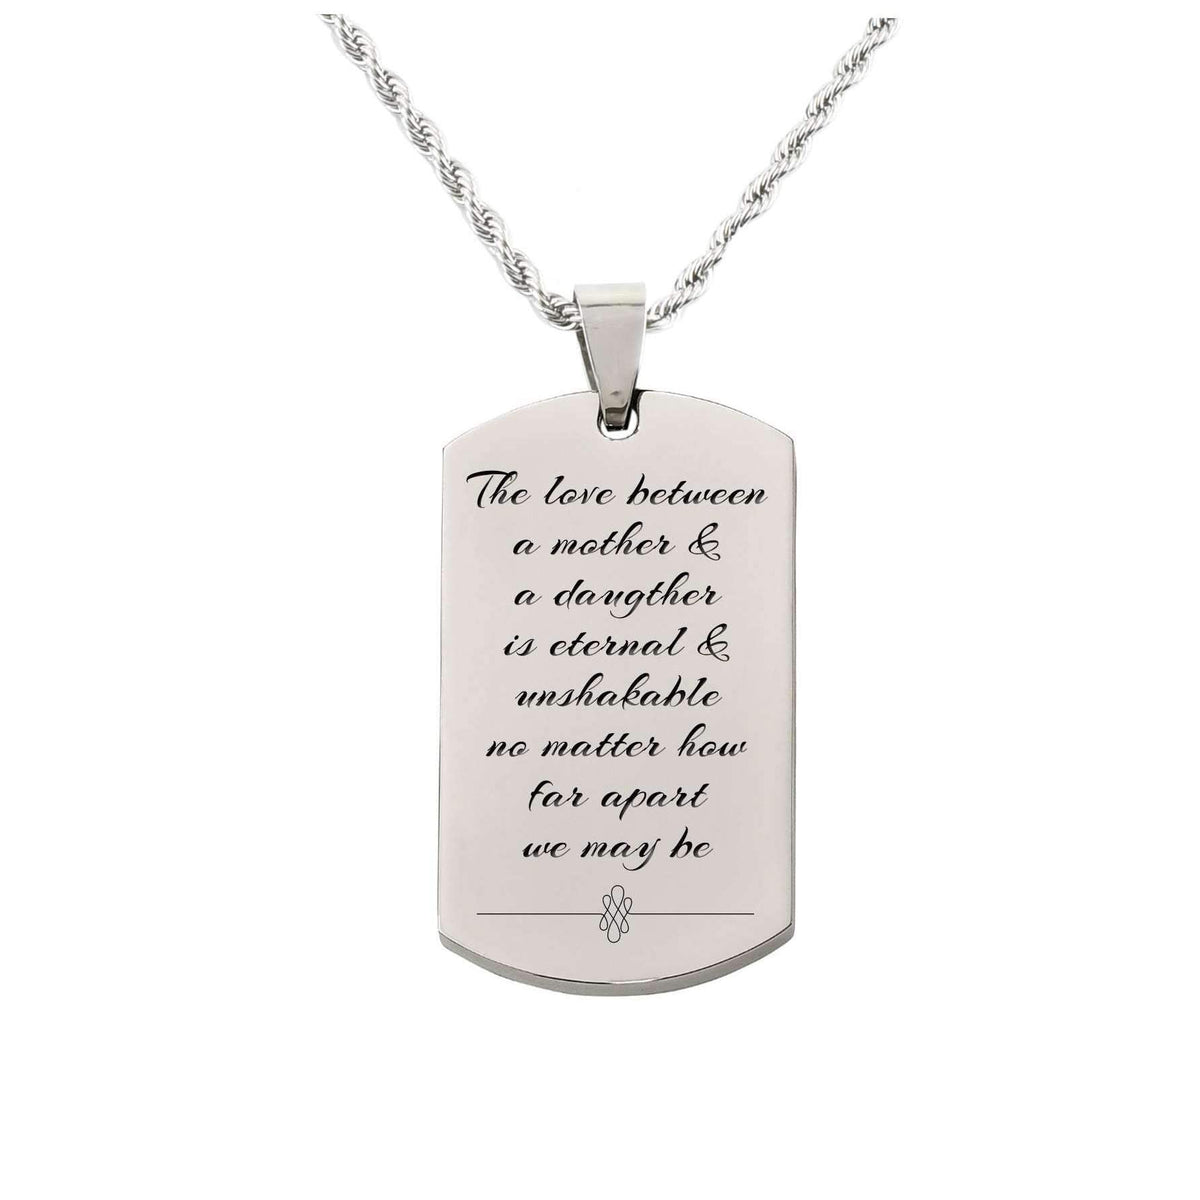 Jewelry &amp; Watches Love Between Mother Tag Necklace